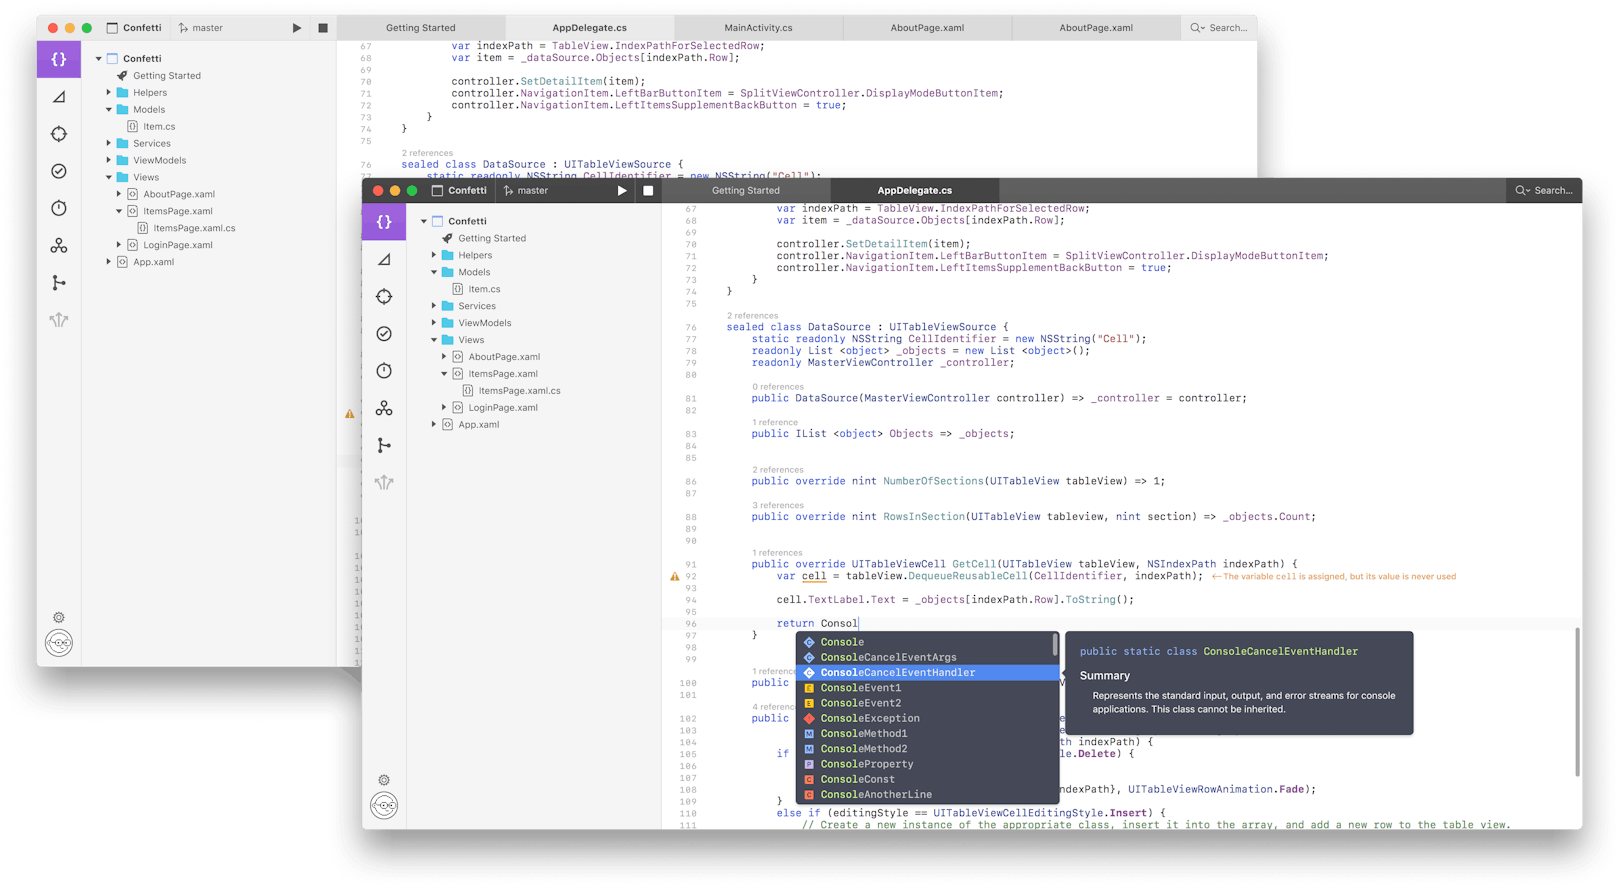 Screenshot of an experimental software development environment with a File Explorer on the left, Code Editor in the center showing C# source code for a UITableView data source, and auto-complete suggestions visible. A warning icon indicates a potential issue in the code or environment setup.